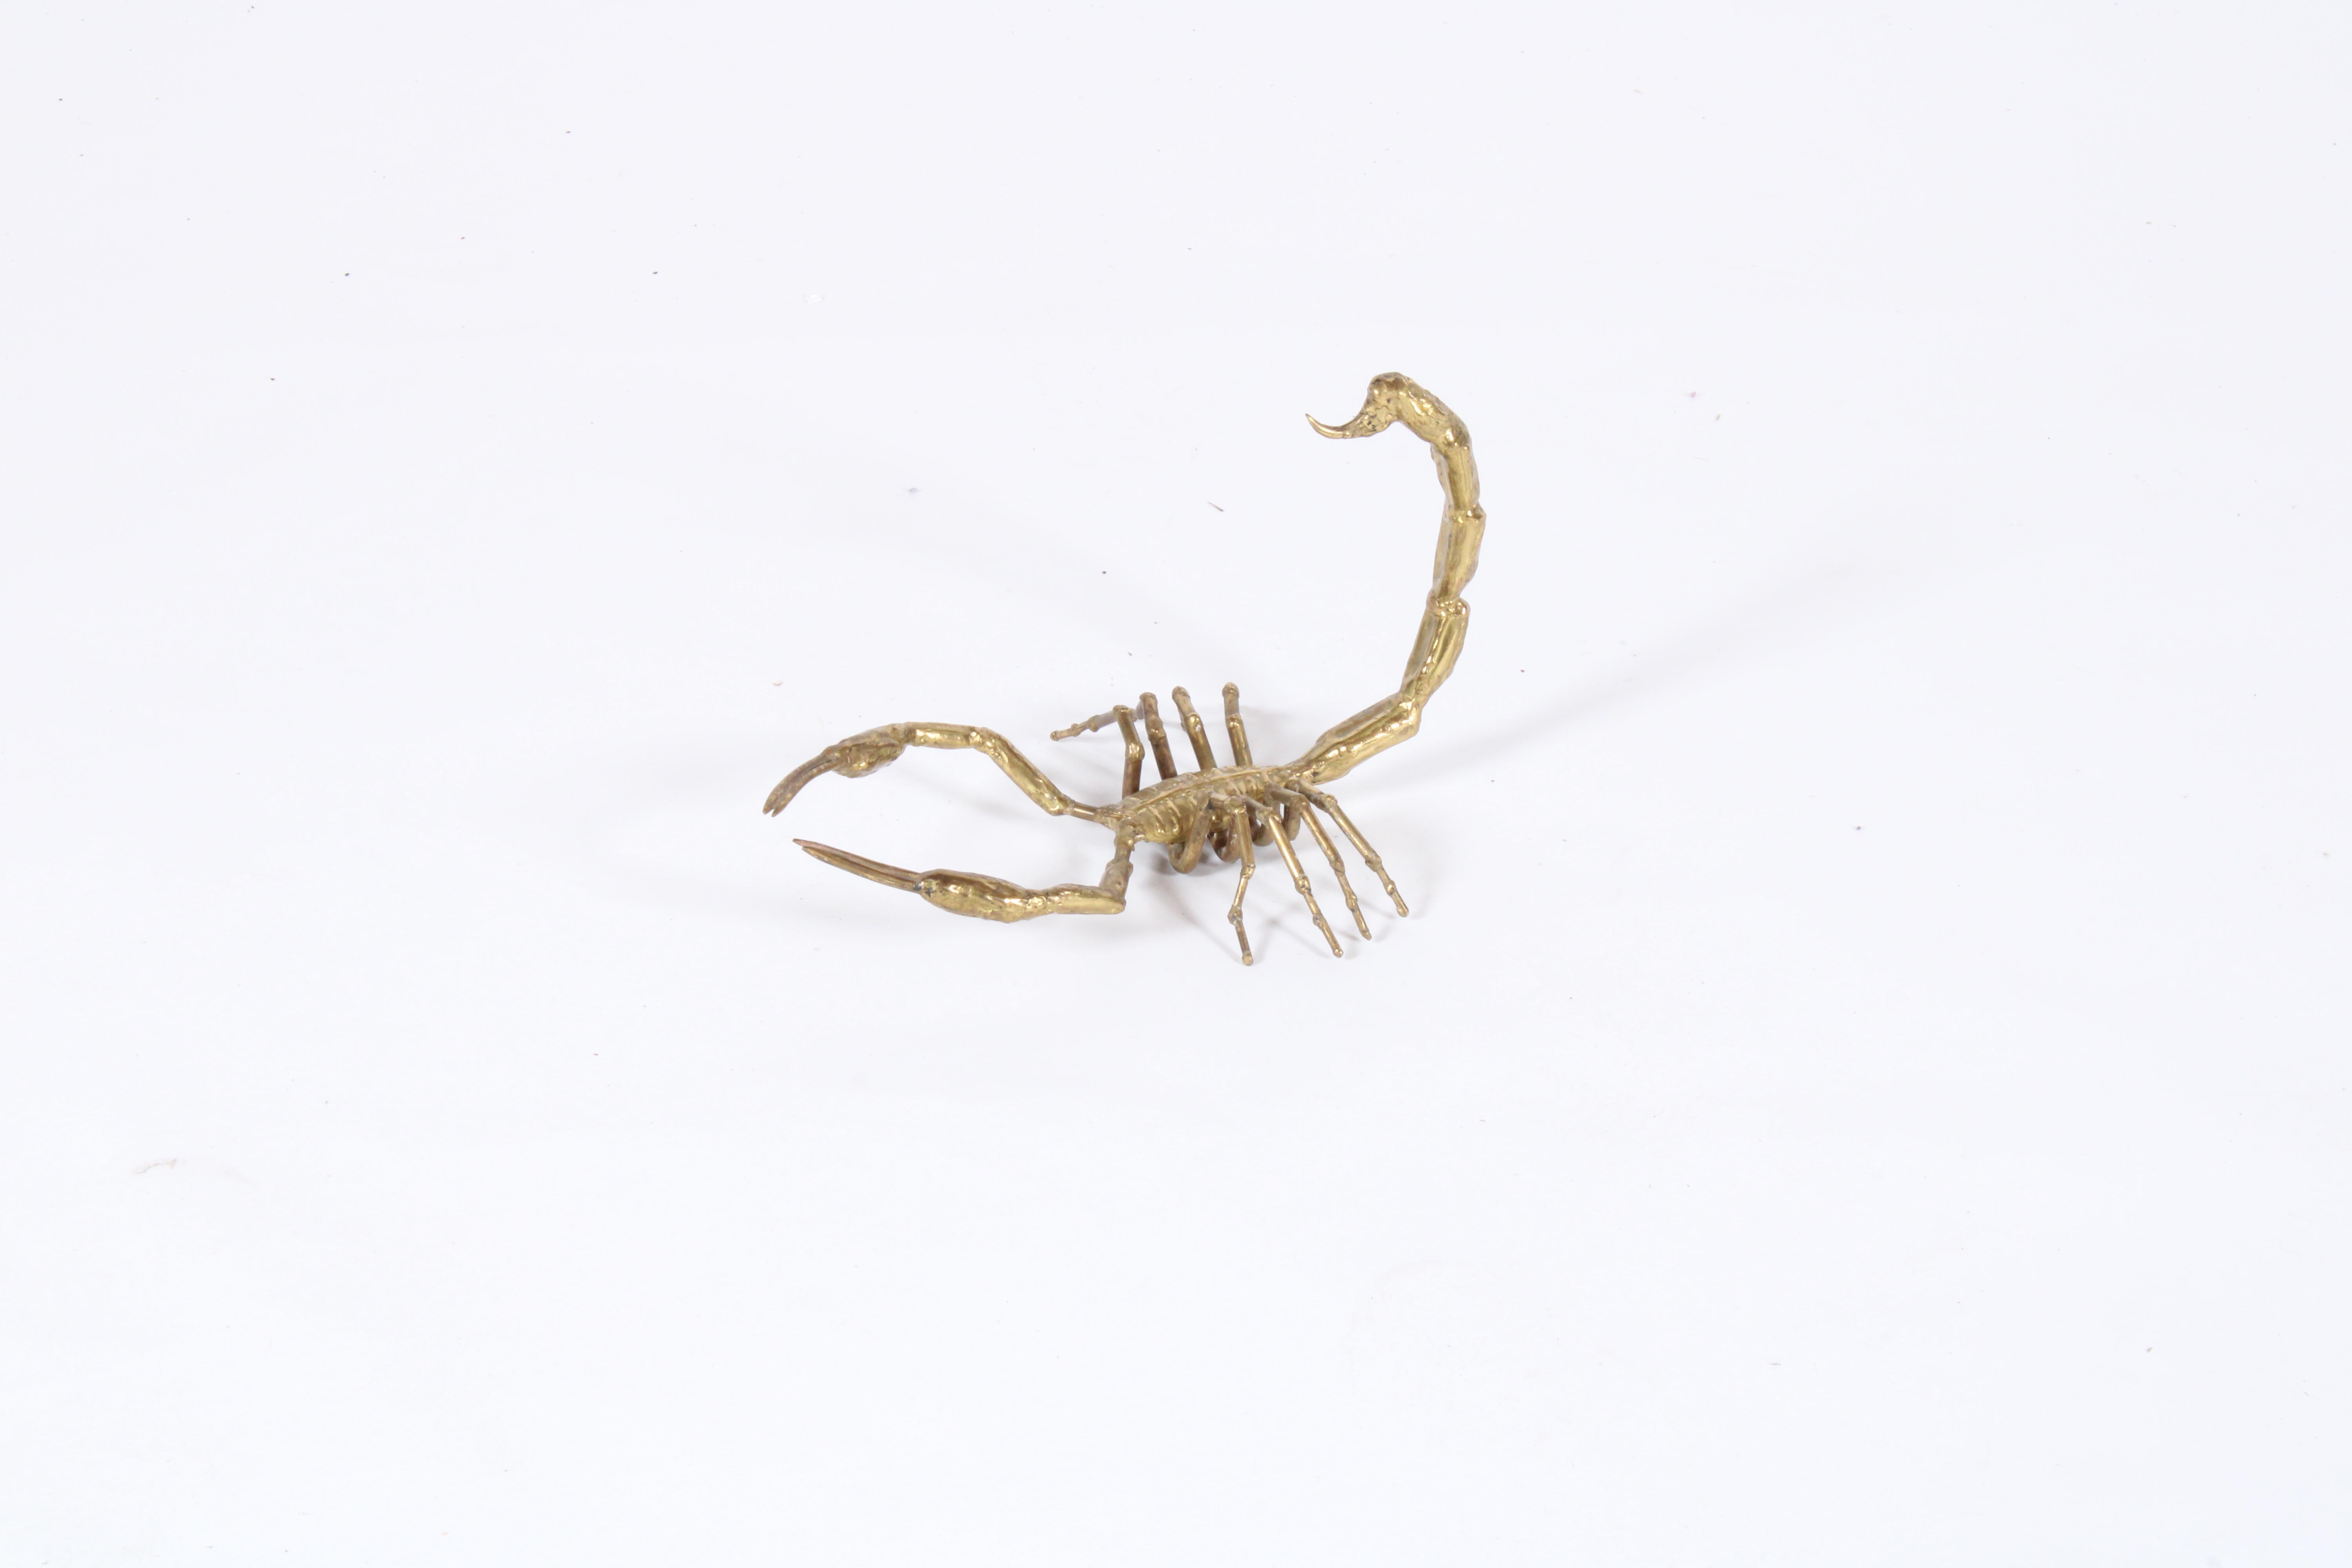 Vintage Italian brass sculpture in the form of a scorpion bearing the artists stamp underneath. A striking piece that will look amazing in any private home or commercial premises.
Italian circa 1970
35.5 x 14 x 23 cm